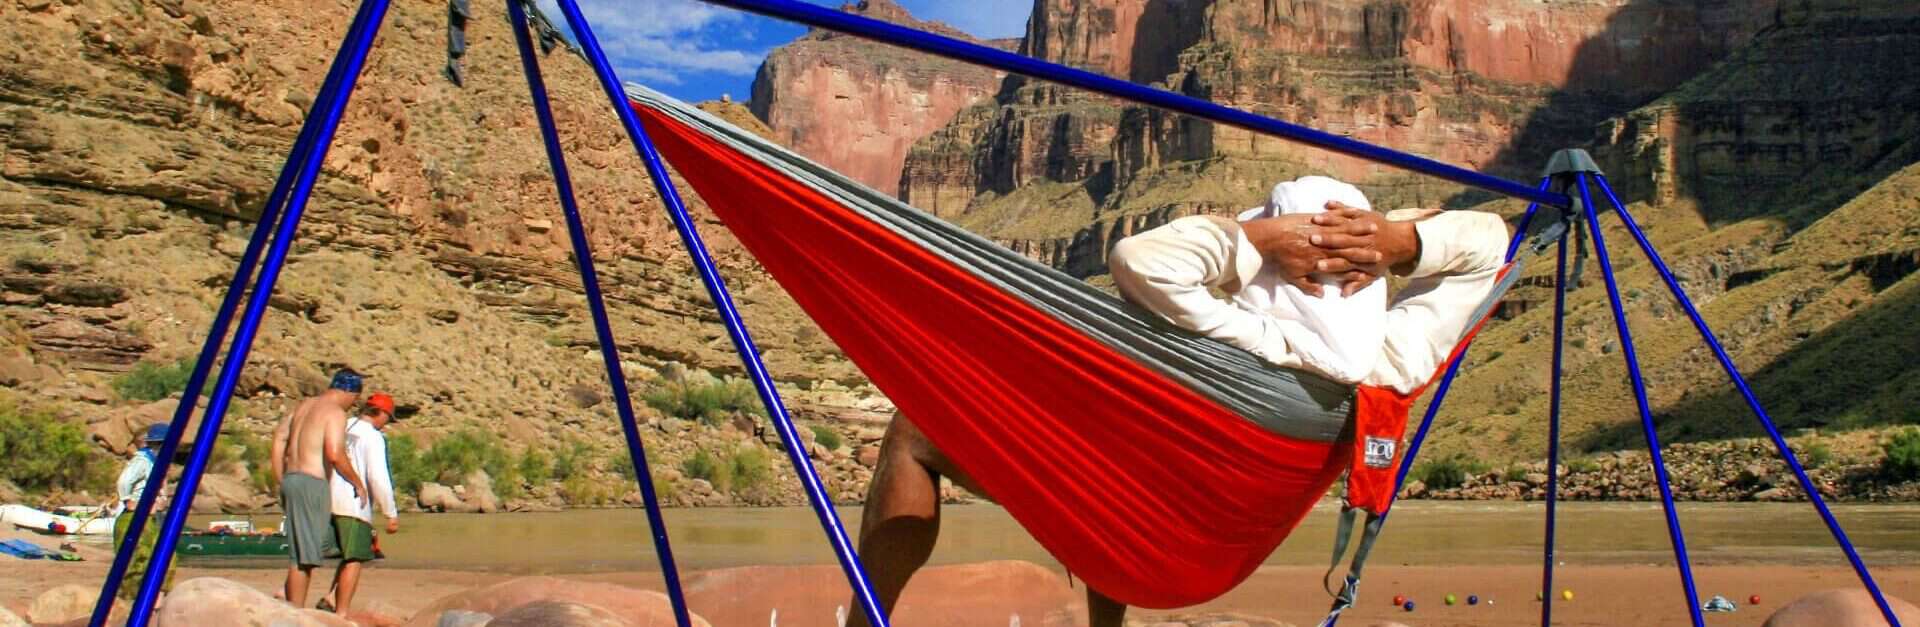 The Eno Nomad stand is the best portable hammock stand for camping